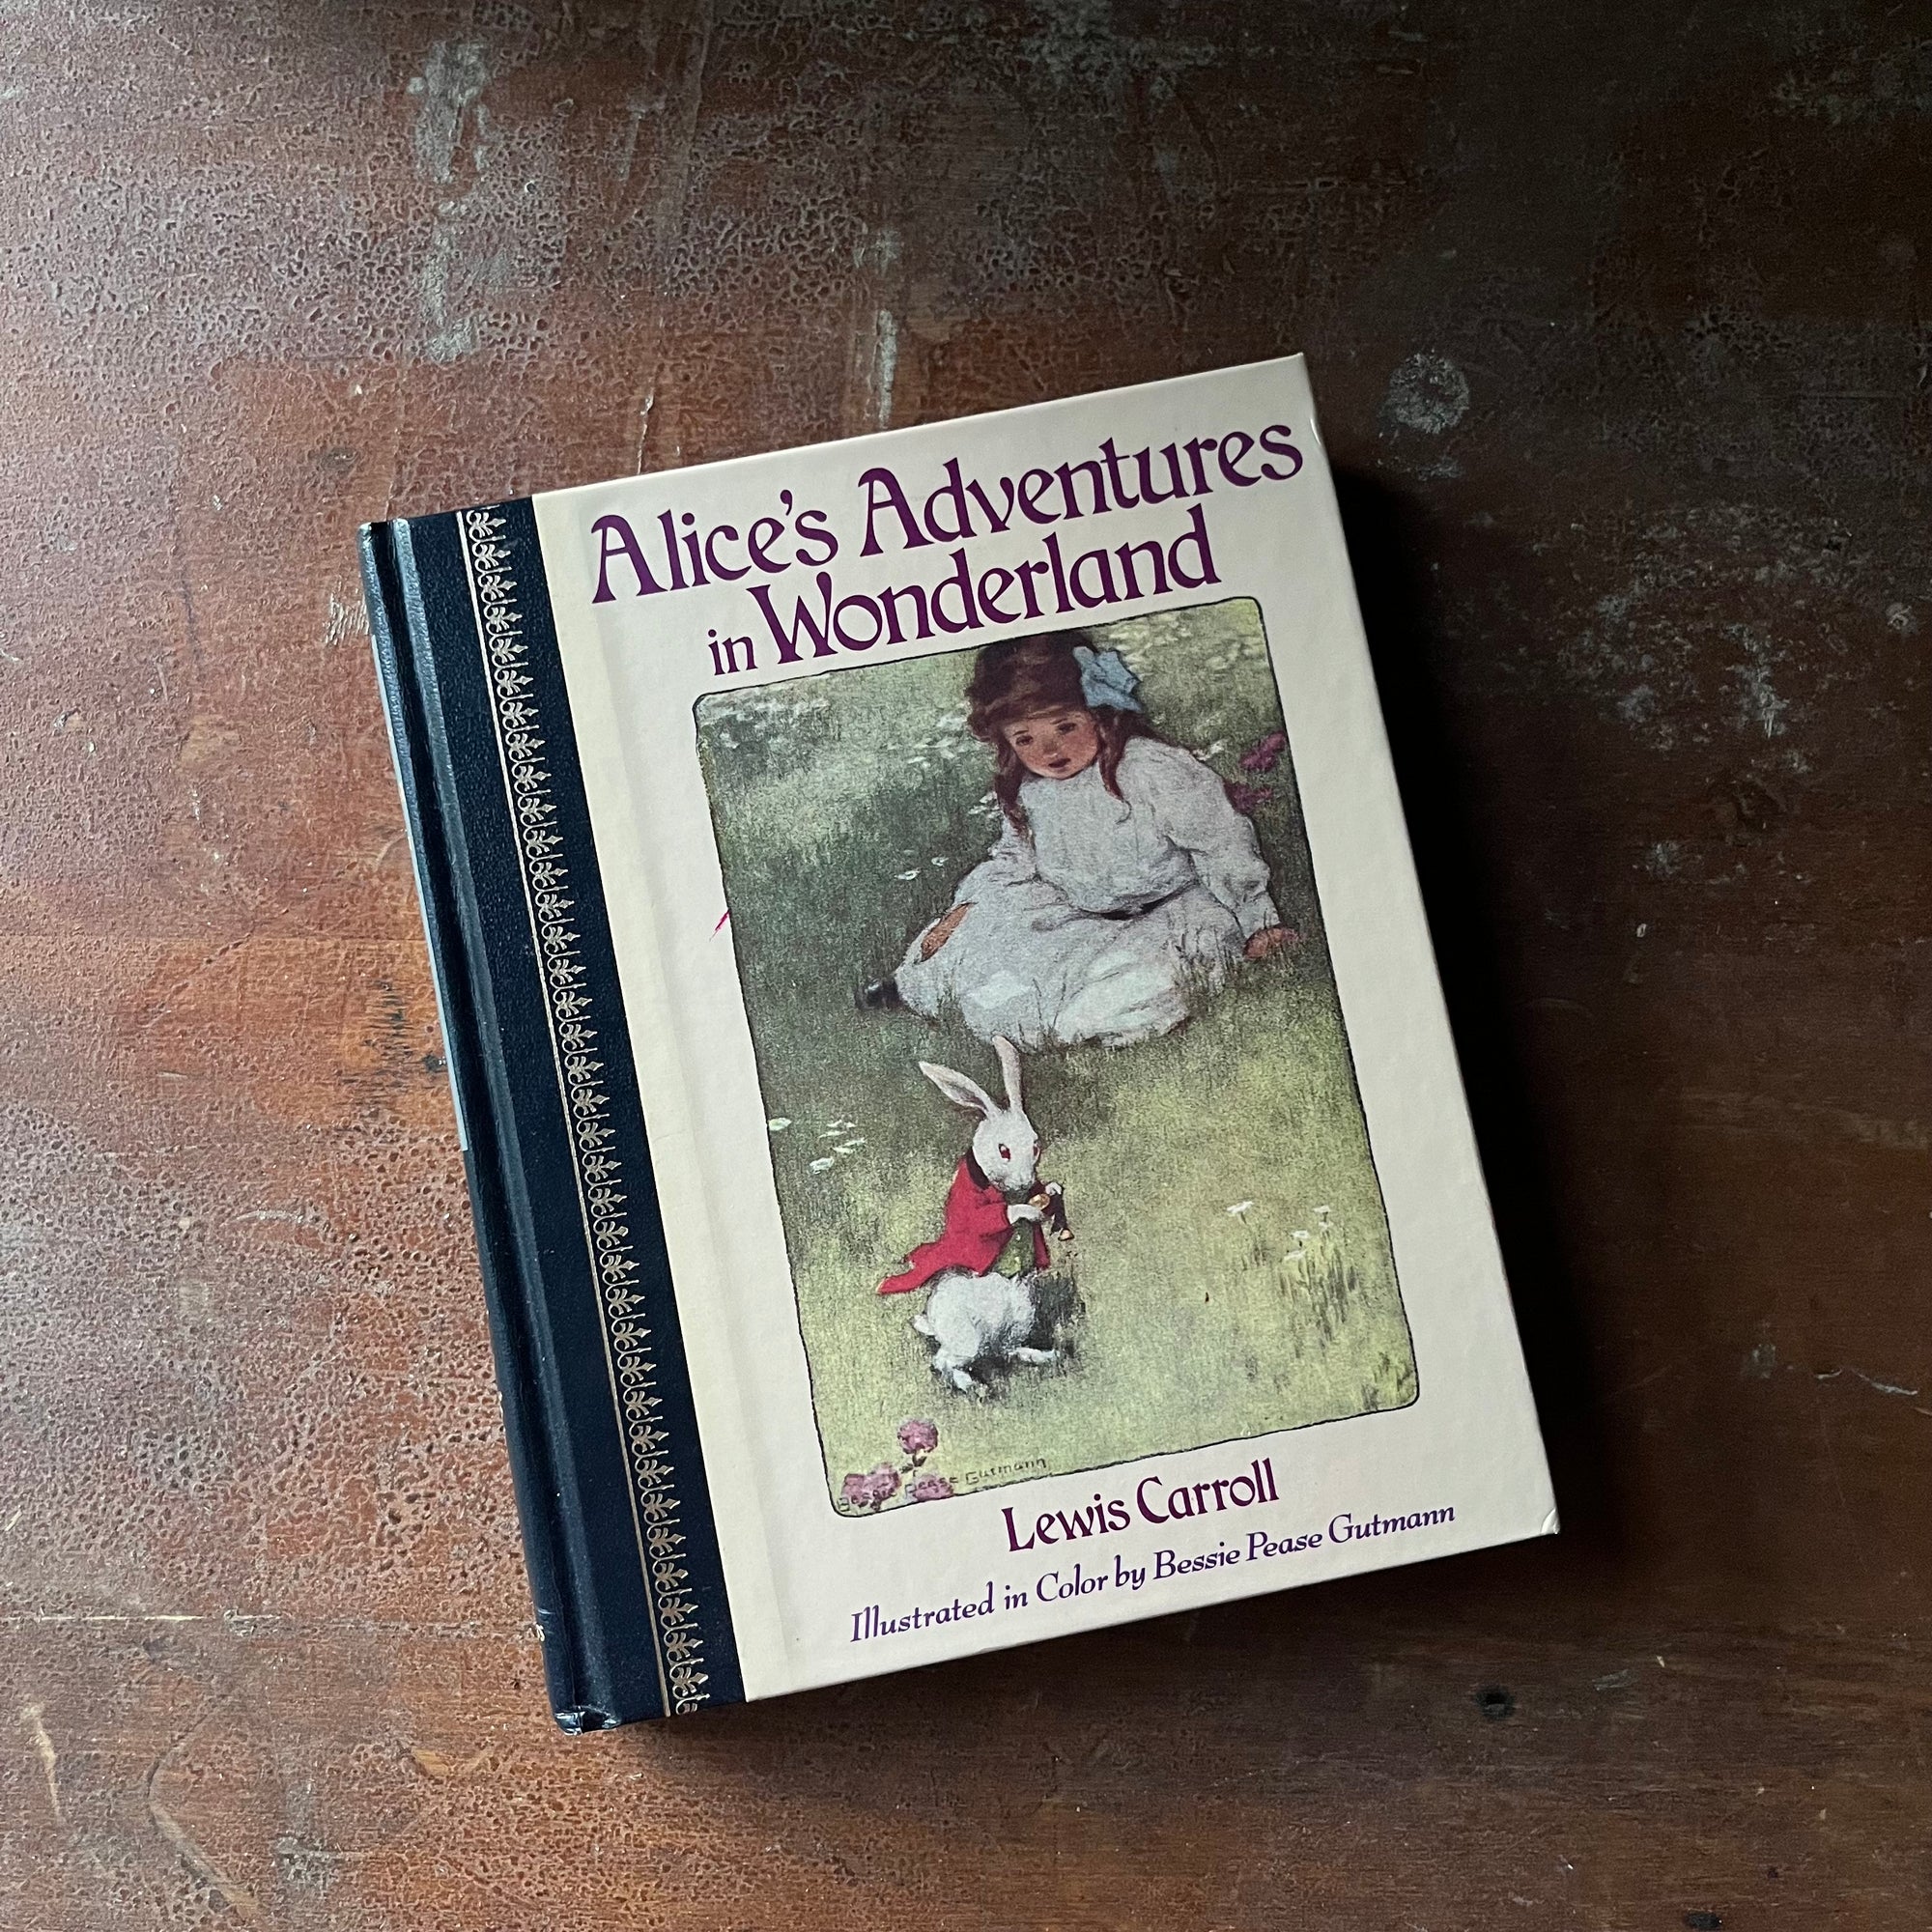 vintage children's classic story - Alice's Adventures in Wonderland written by Lewis Carroll with illustrations by Bessie Peace Gutmann & John Tenniel, Children's Classics Edition - view of the front cover